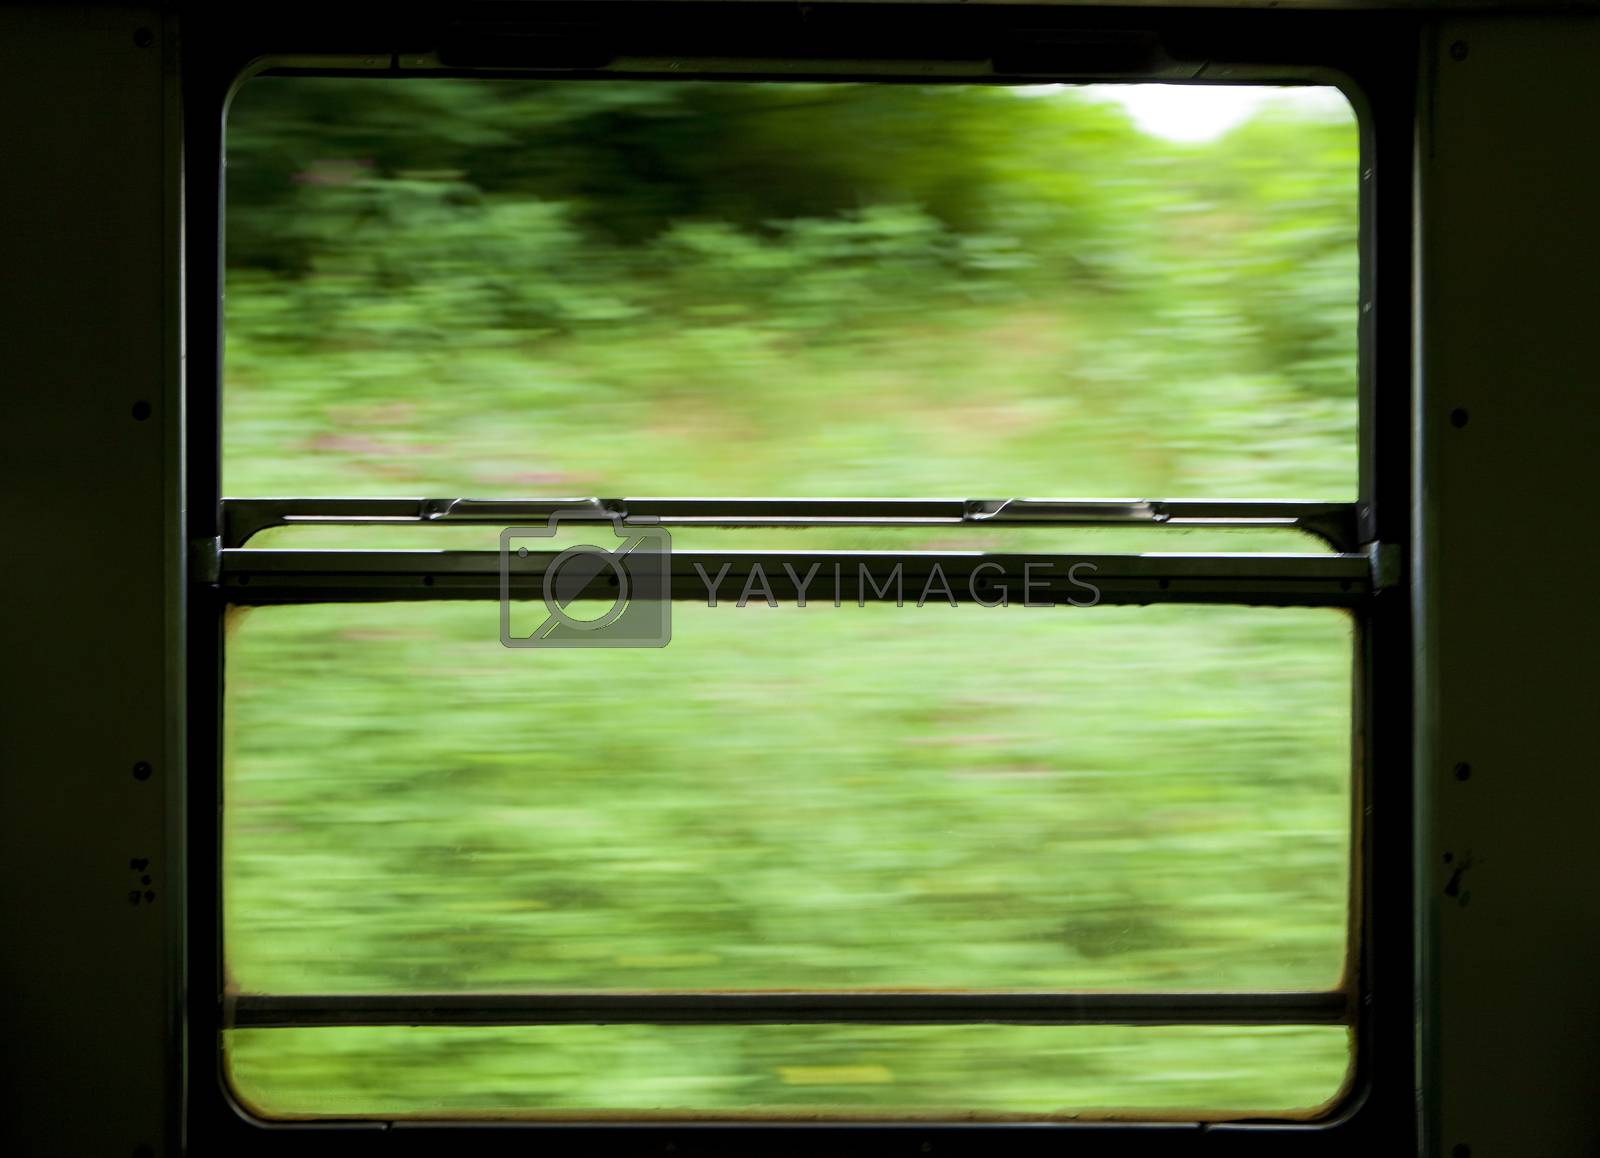 Royalty free image of view of moving train window by courtyardpix